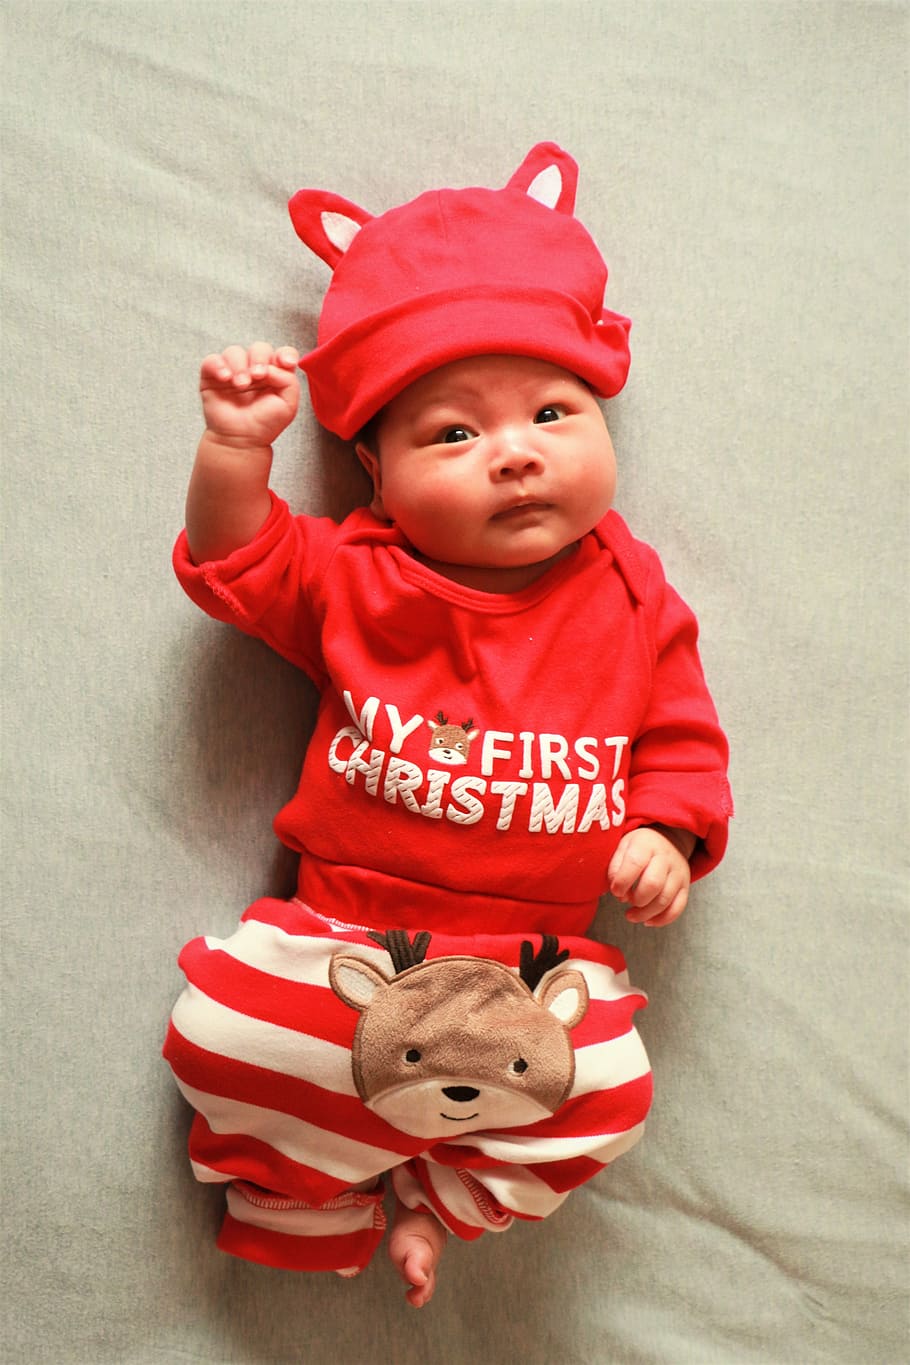 Full Moon, Christmas, Clothing, baby, the full moon, cute, babies only, childhood, one person, innocence